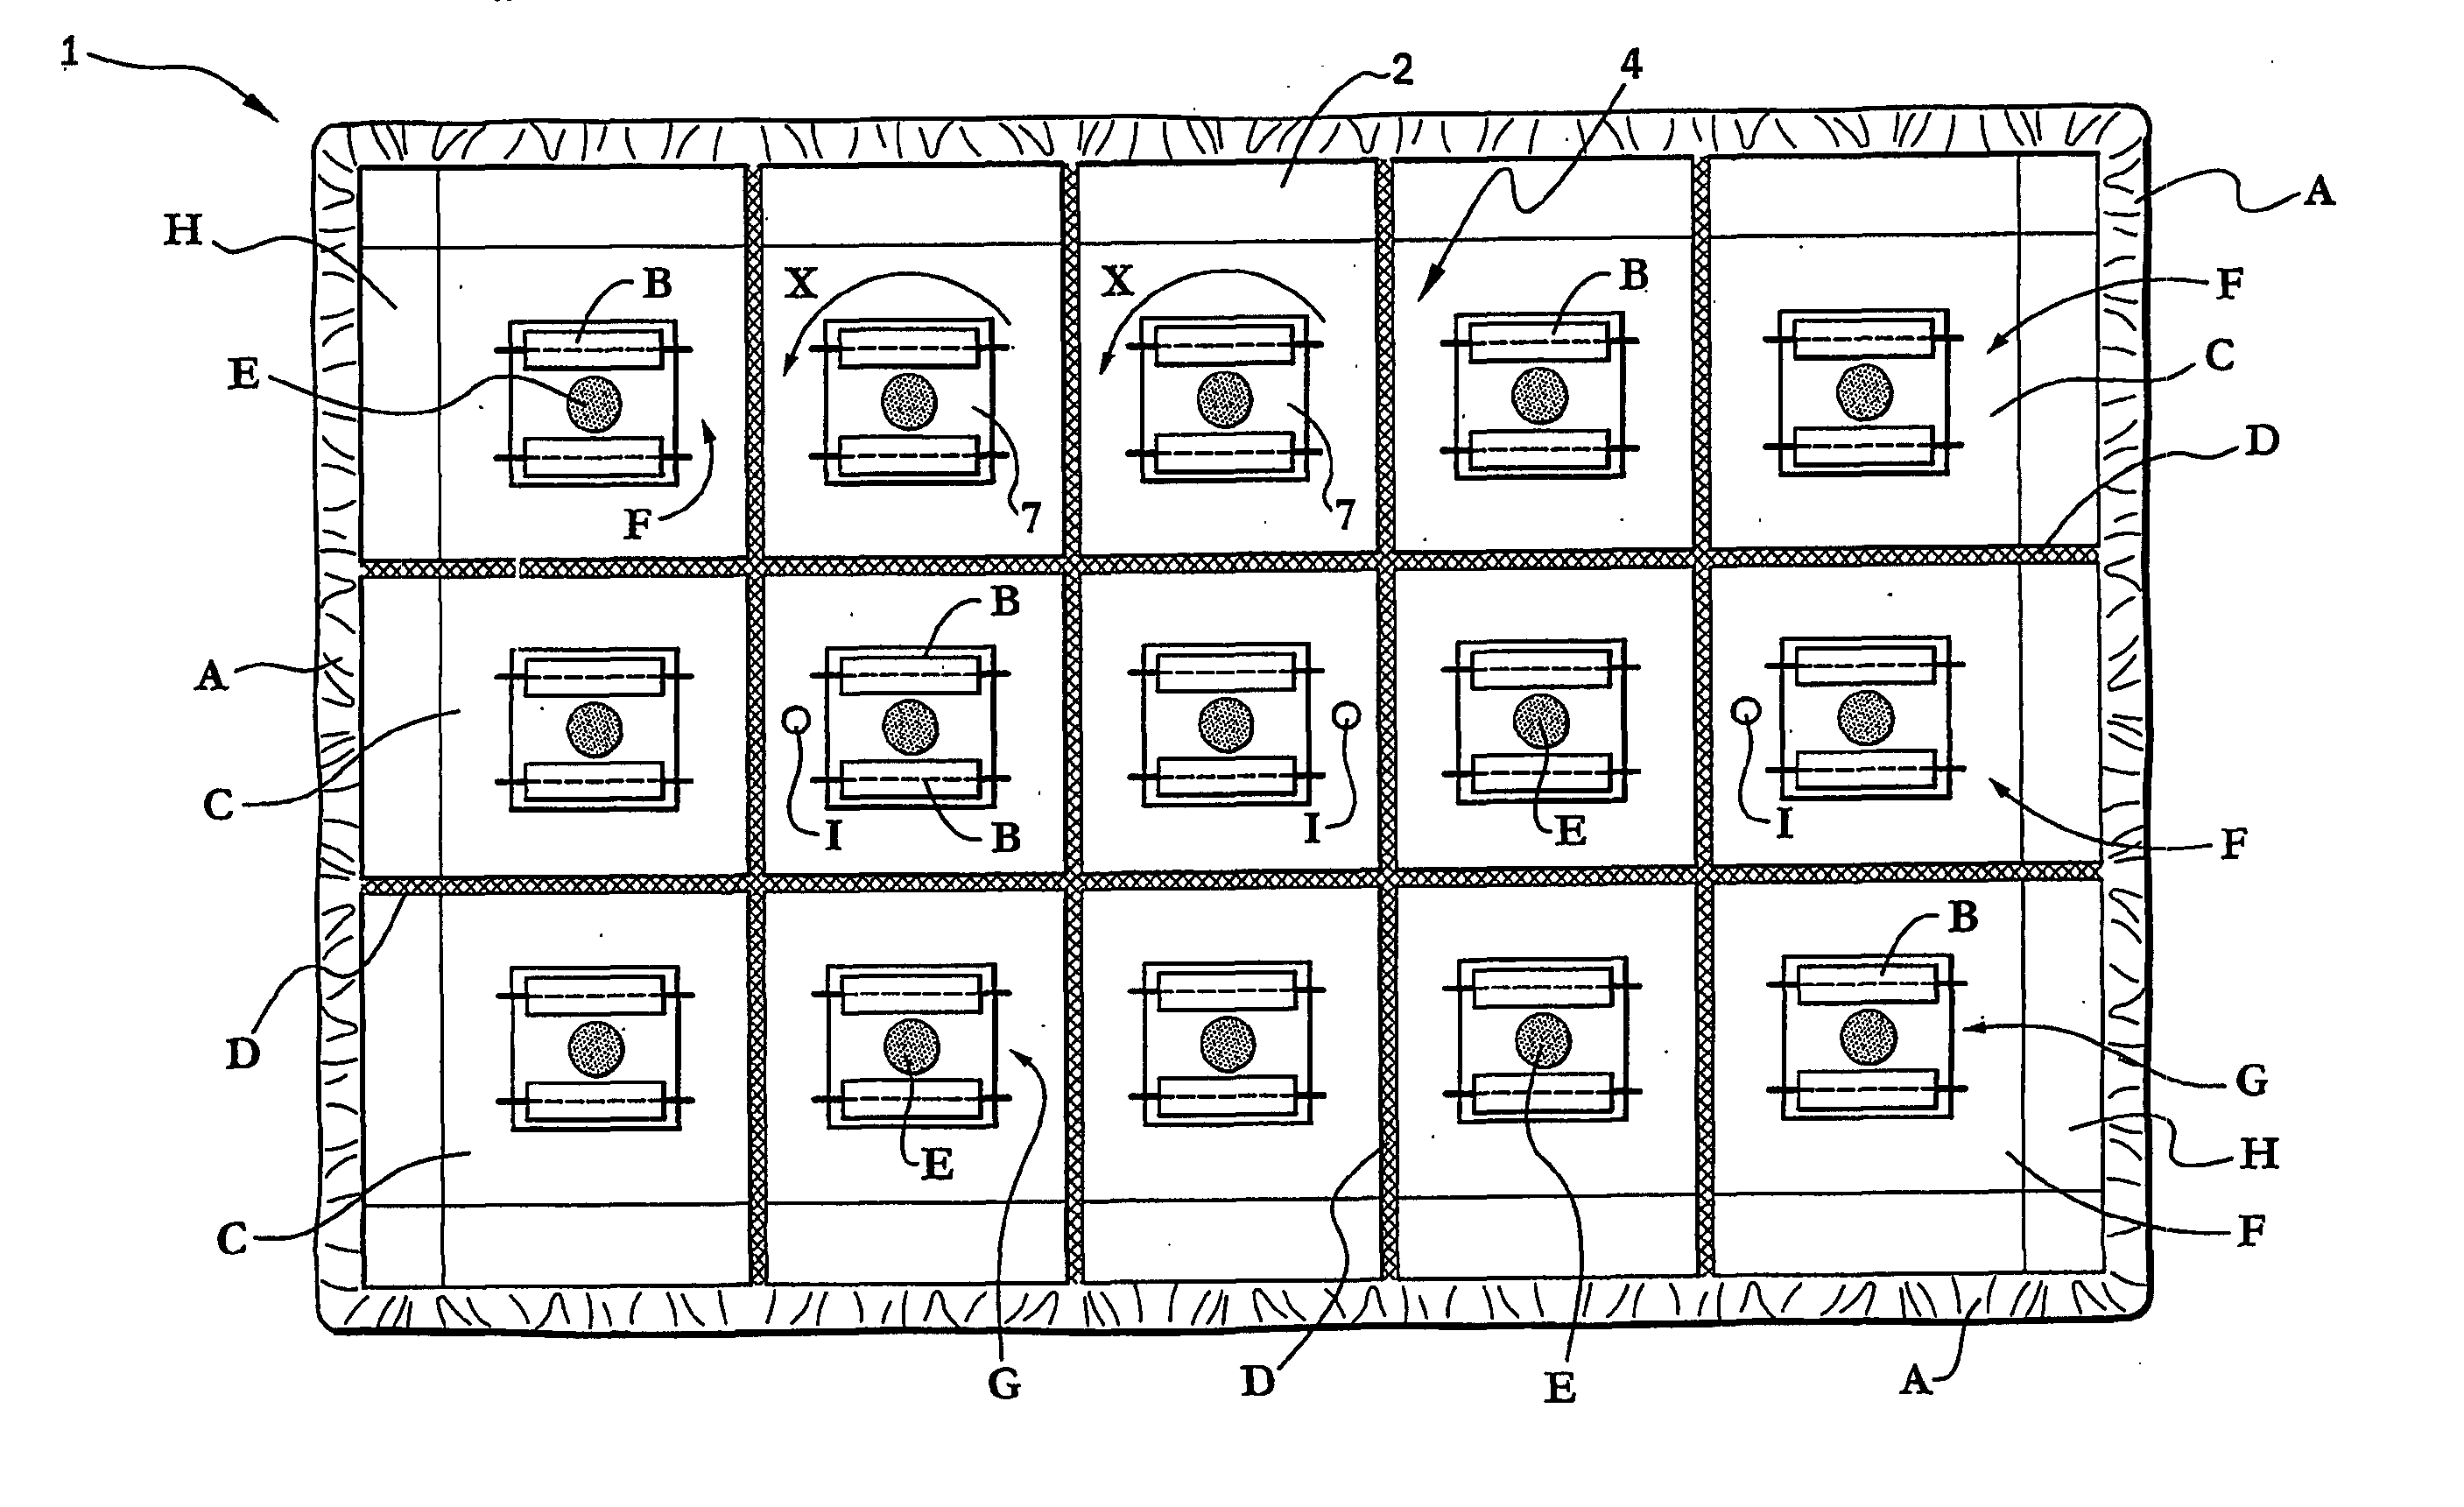 Method and apparatus for treating marine growth on a surface